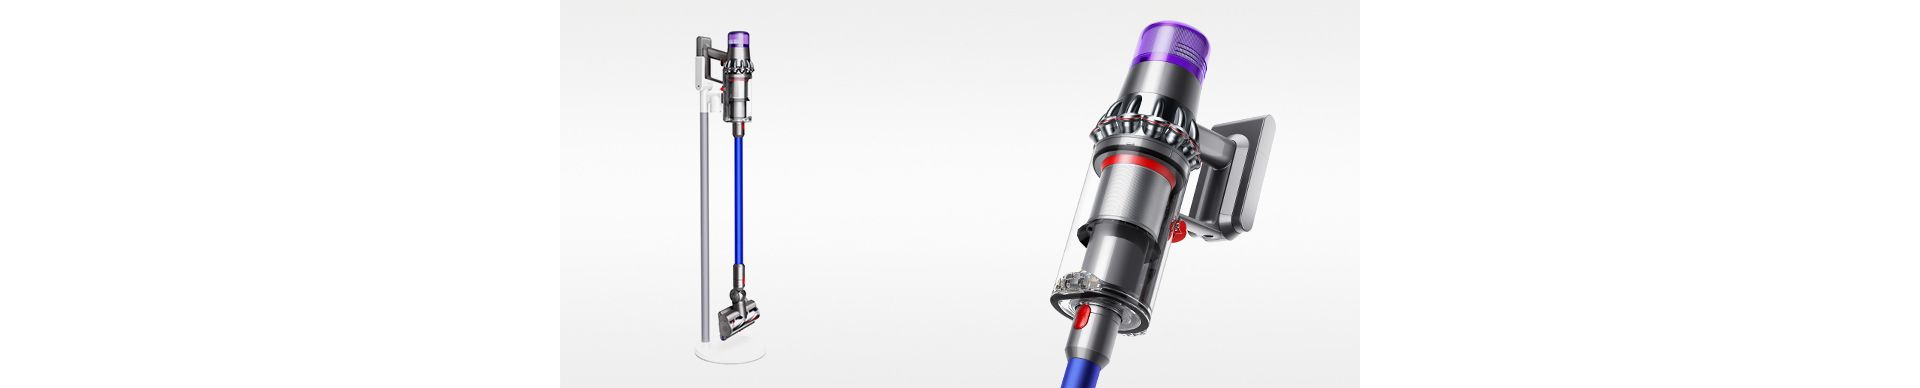 Image showing Dyson V11 Absolute Pro